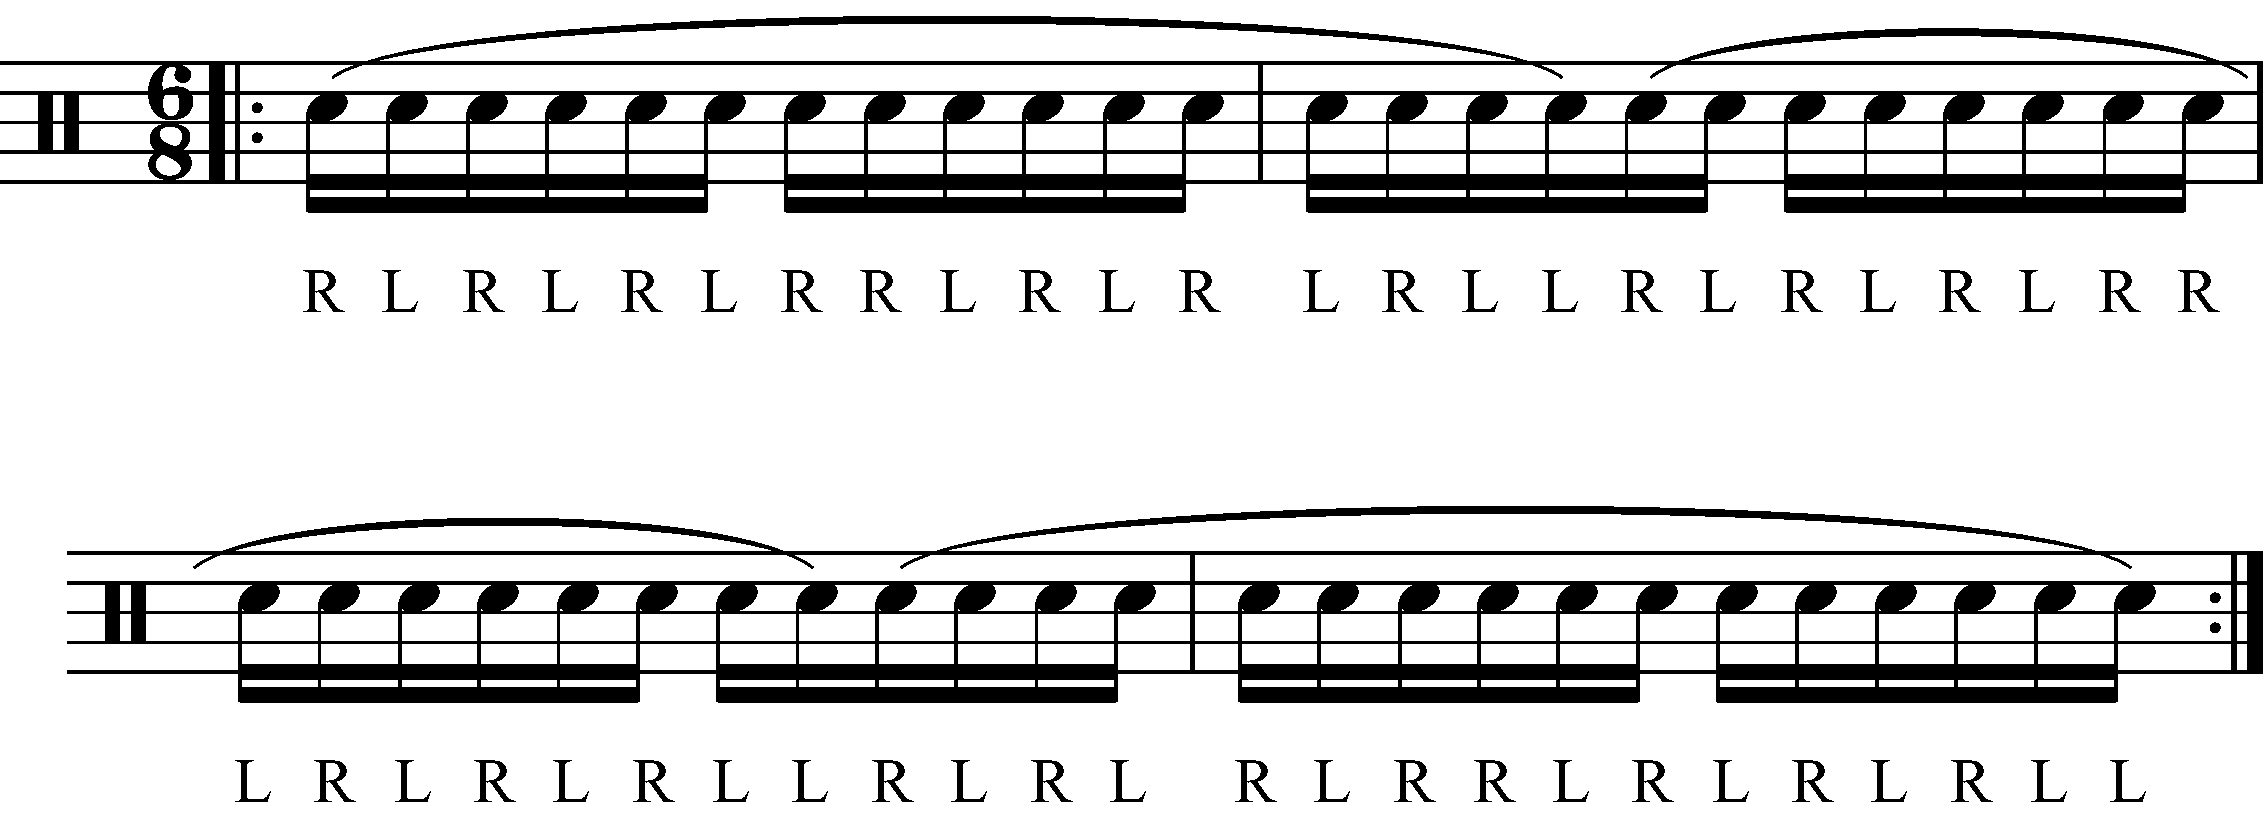 A Triple Paradiddle in 6/8